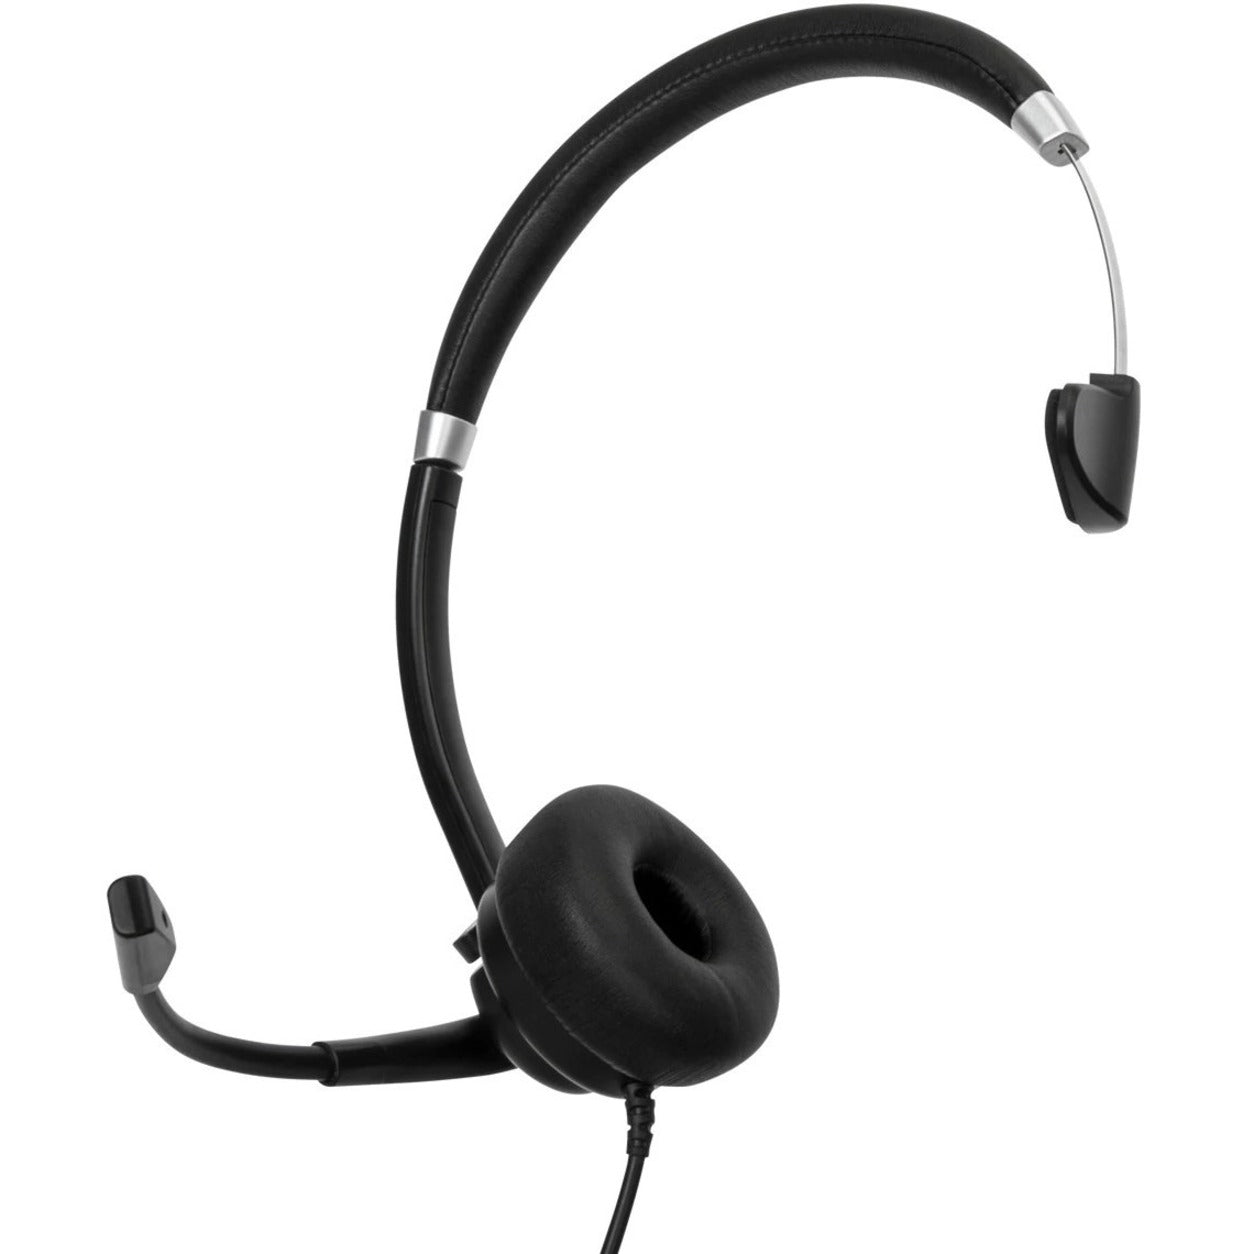 Targus AEH101TT Wired Mono Headset, Lightweight On-ear Headset with Rotating Microphone, USB Type A Interface